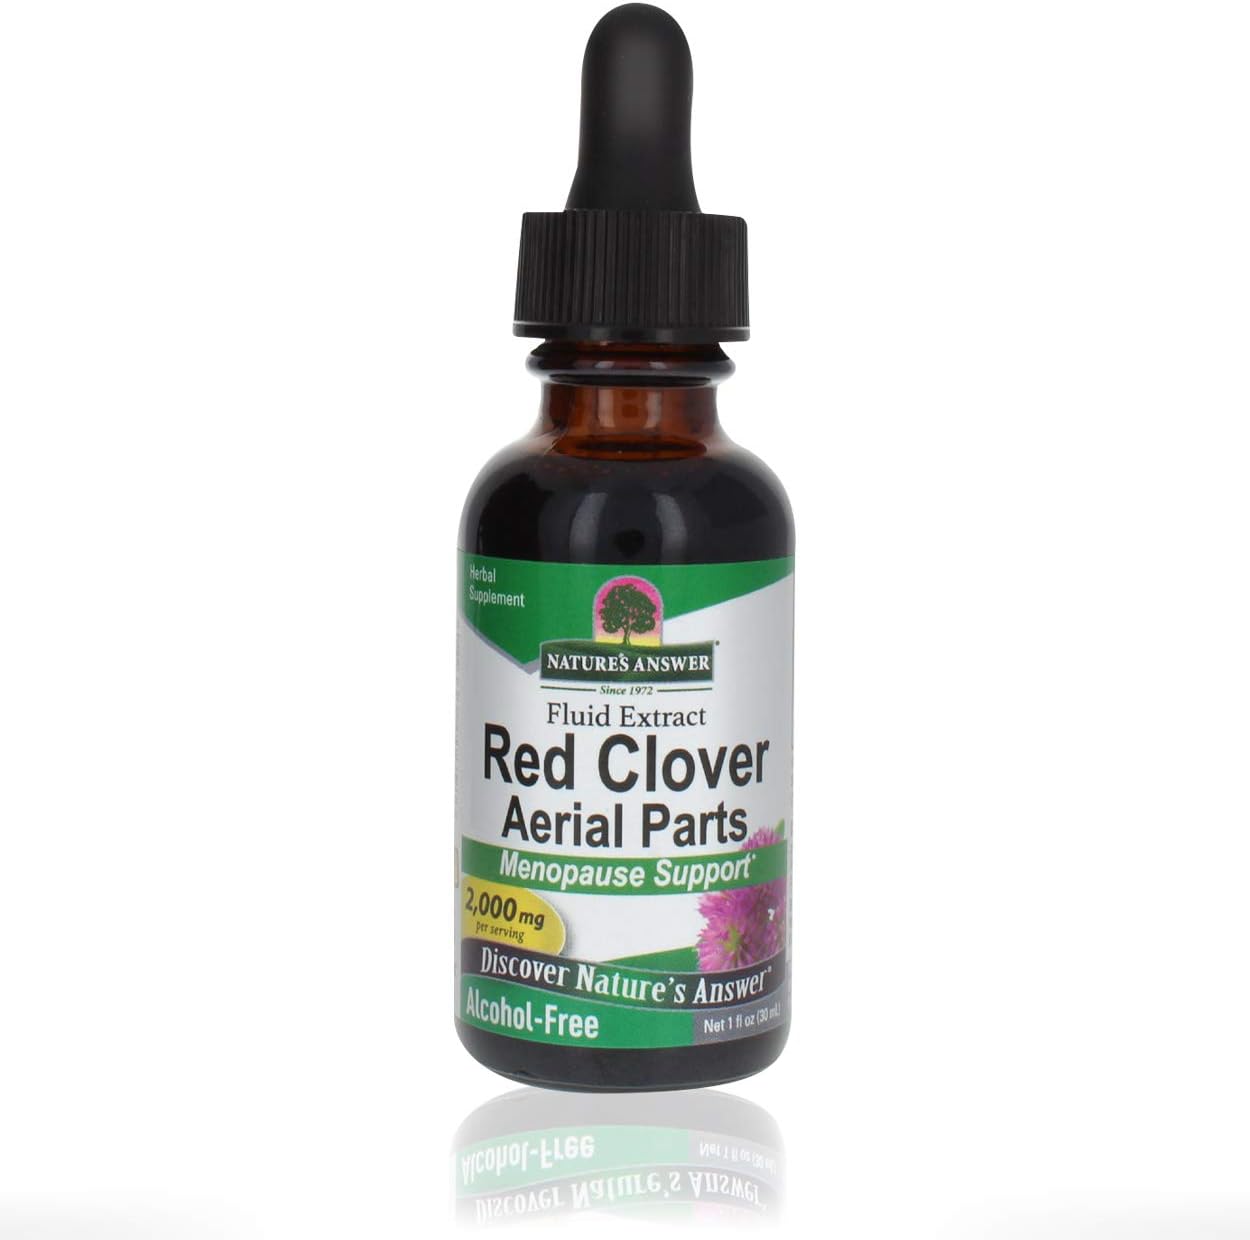 Nature’s Answer Red Clover, 2000mg